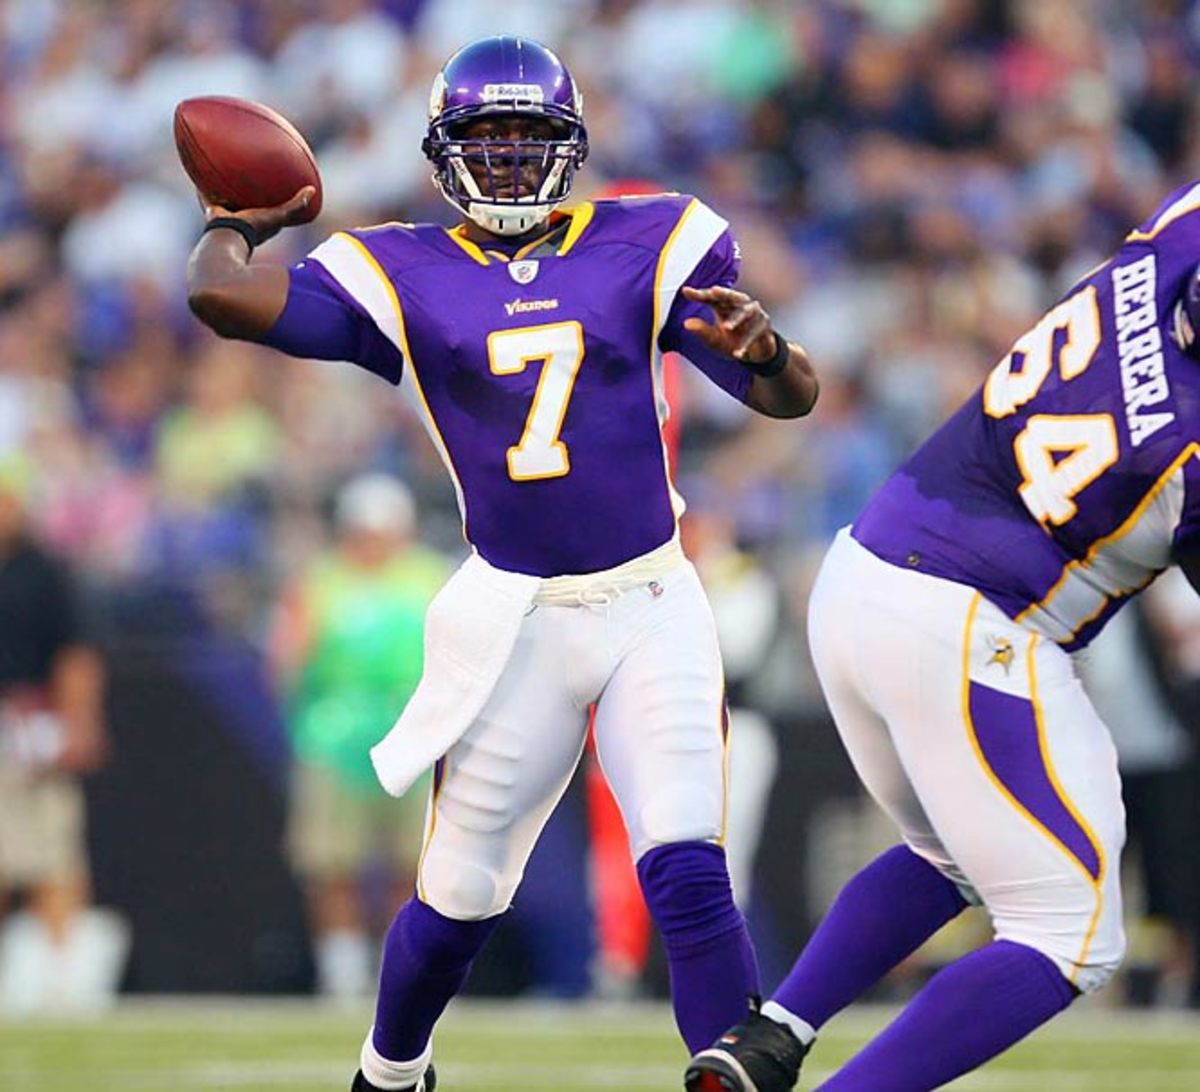 Is Tarvaris Jackson a good enough passer to lead the Vikings to a title?